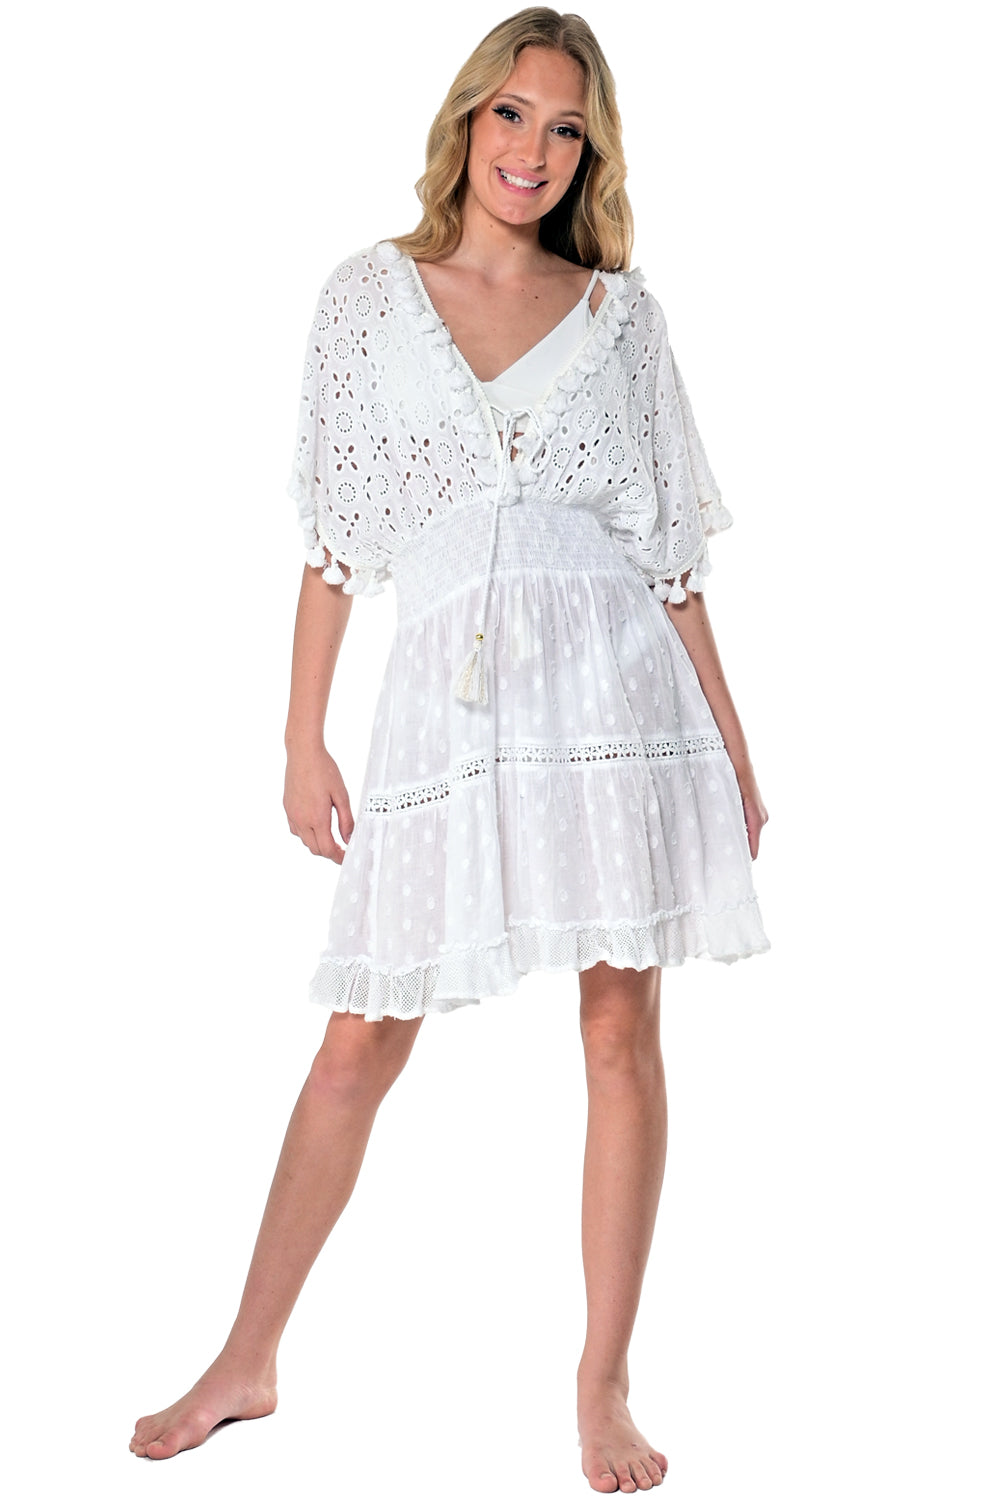 AZUCAR LADIES MINI COVER-UP DRESS WITH TASSELS 100% COTTON - white front view on model LCT1757